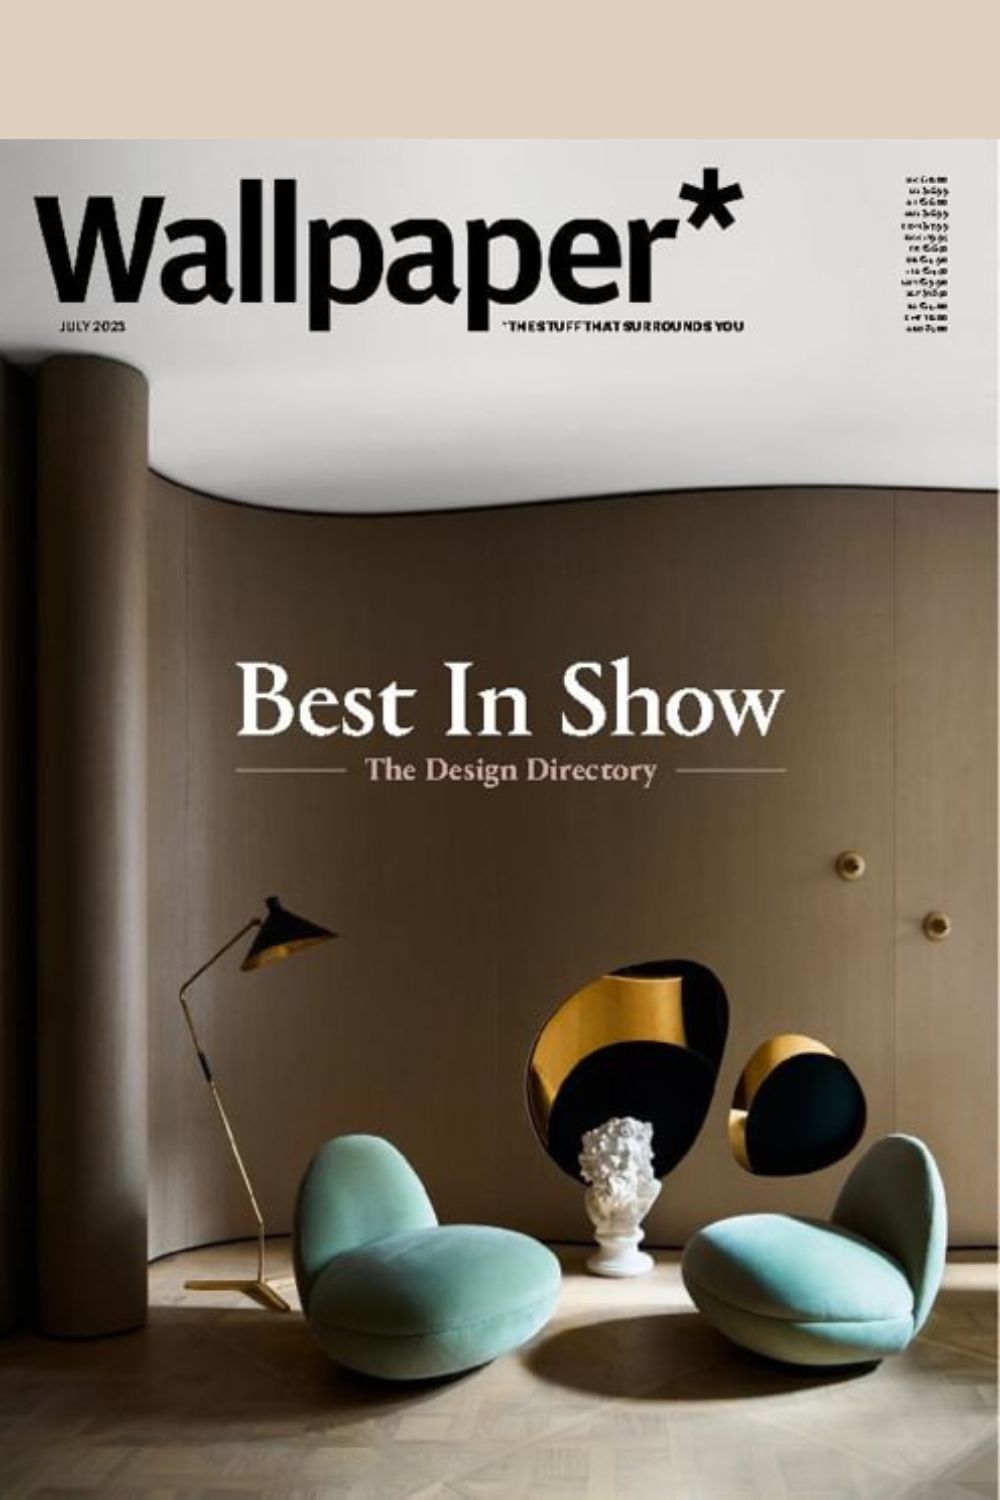 Wallpaper* July 2023 Best in Show Cover